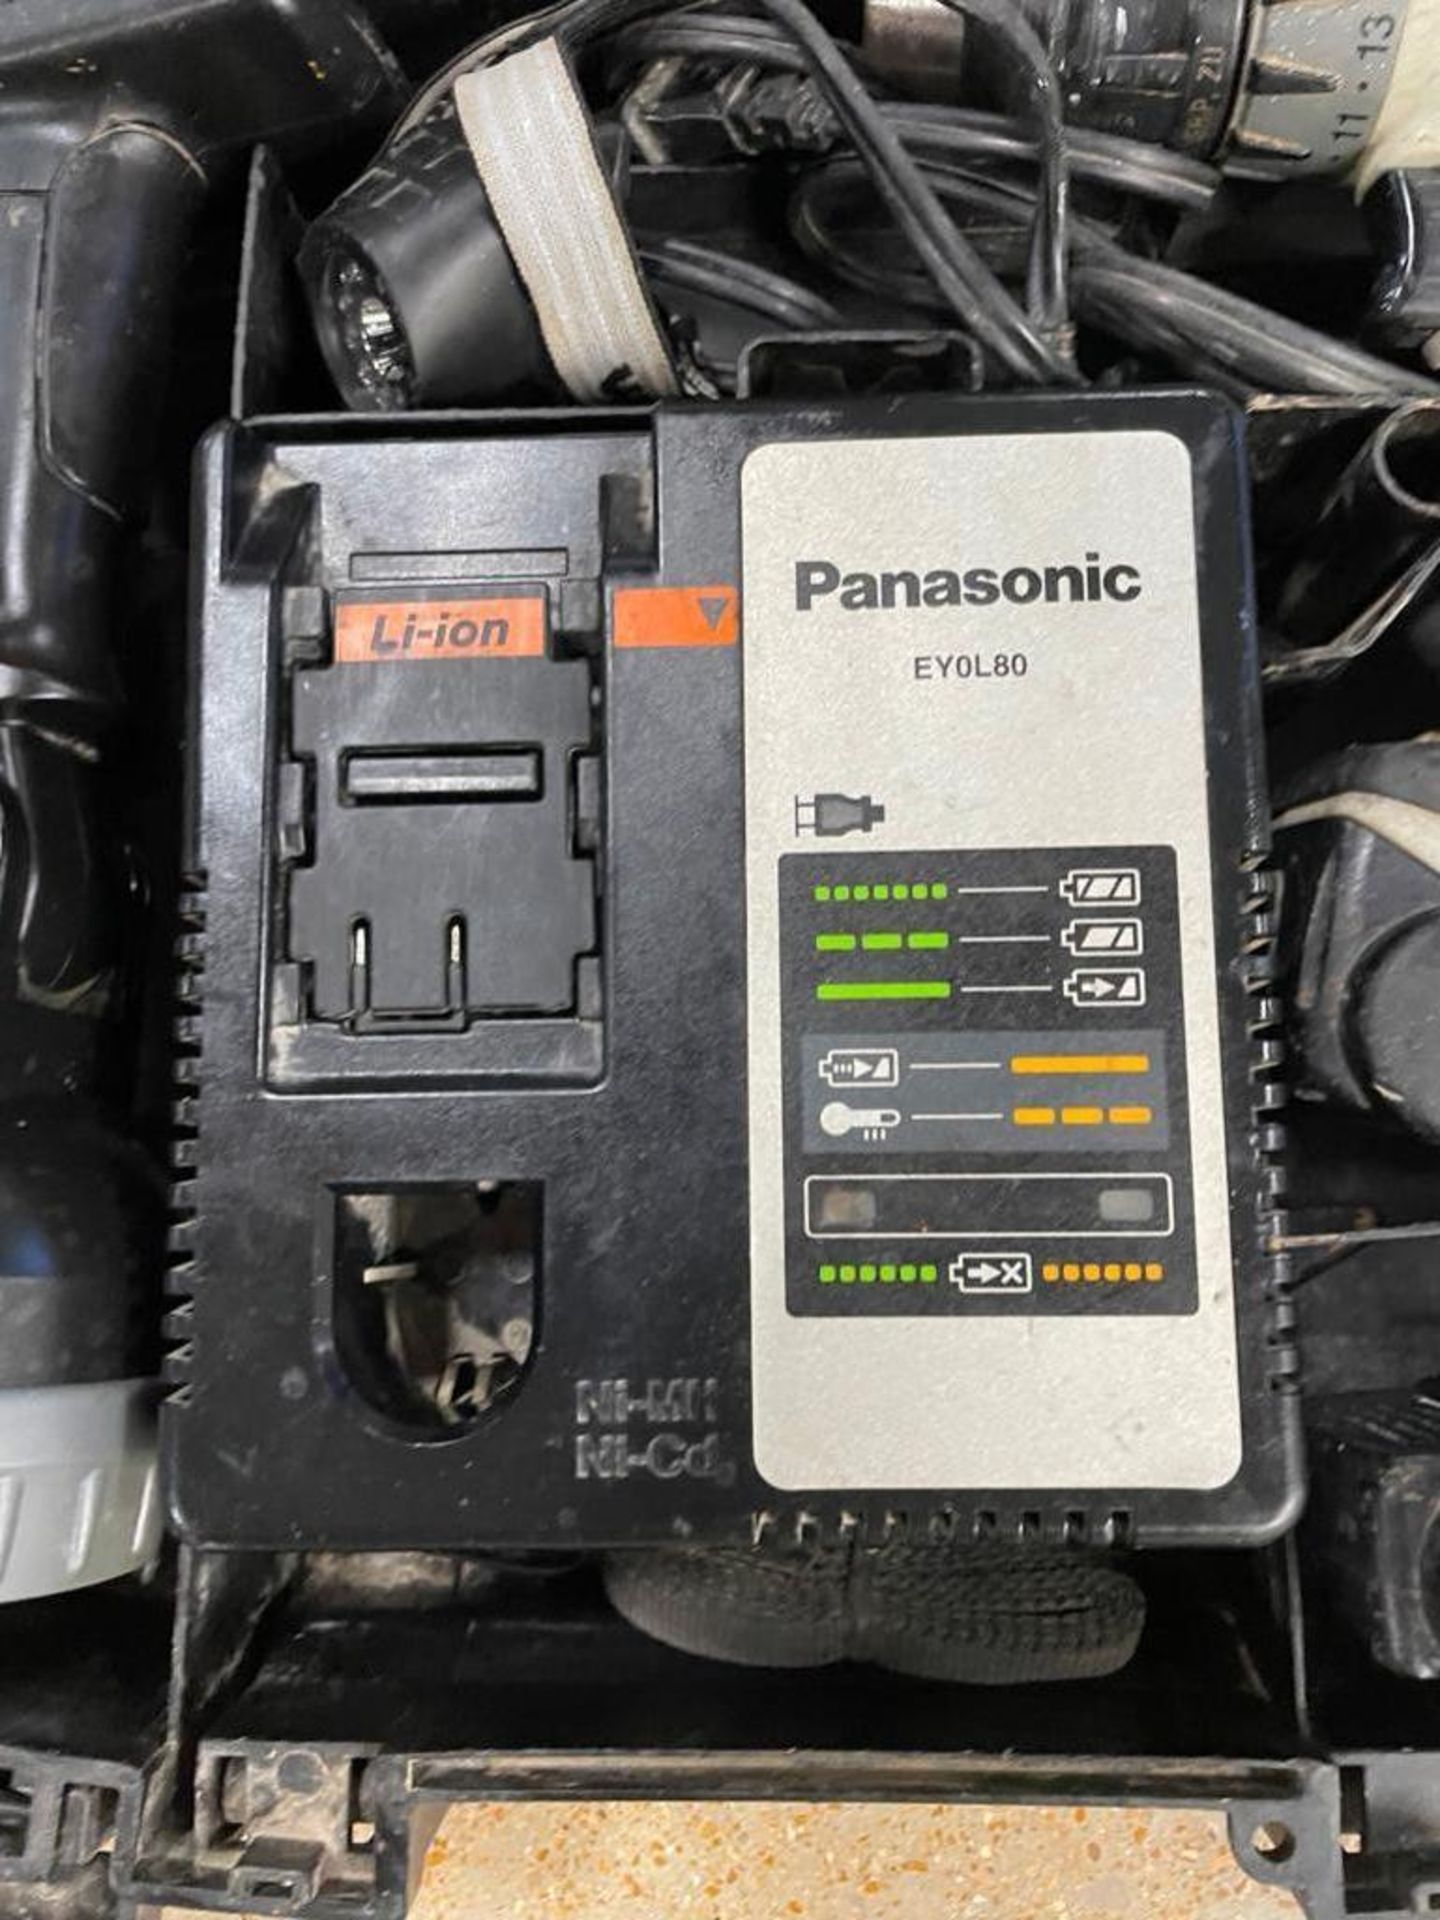 Panasonic Drill & Flashlight in Case with Panasonic Ey0L80 Charger & Li-ion 14.4V Batteries. Located - Image 4 of 5